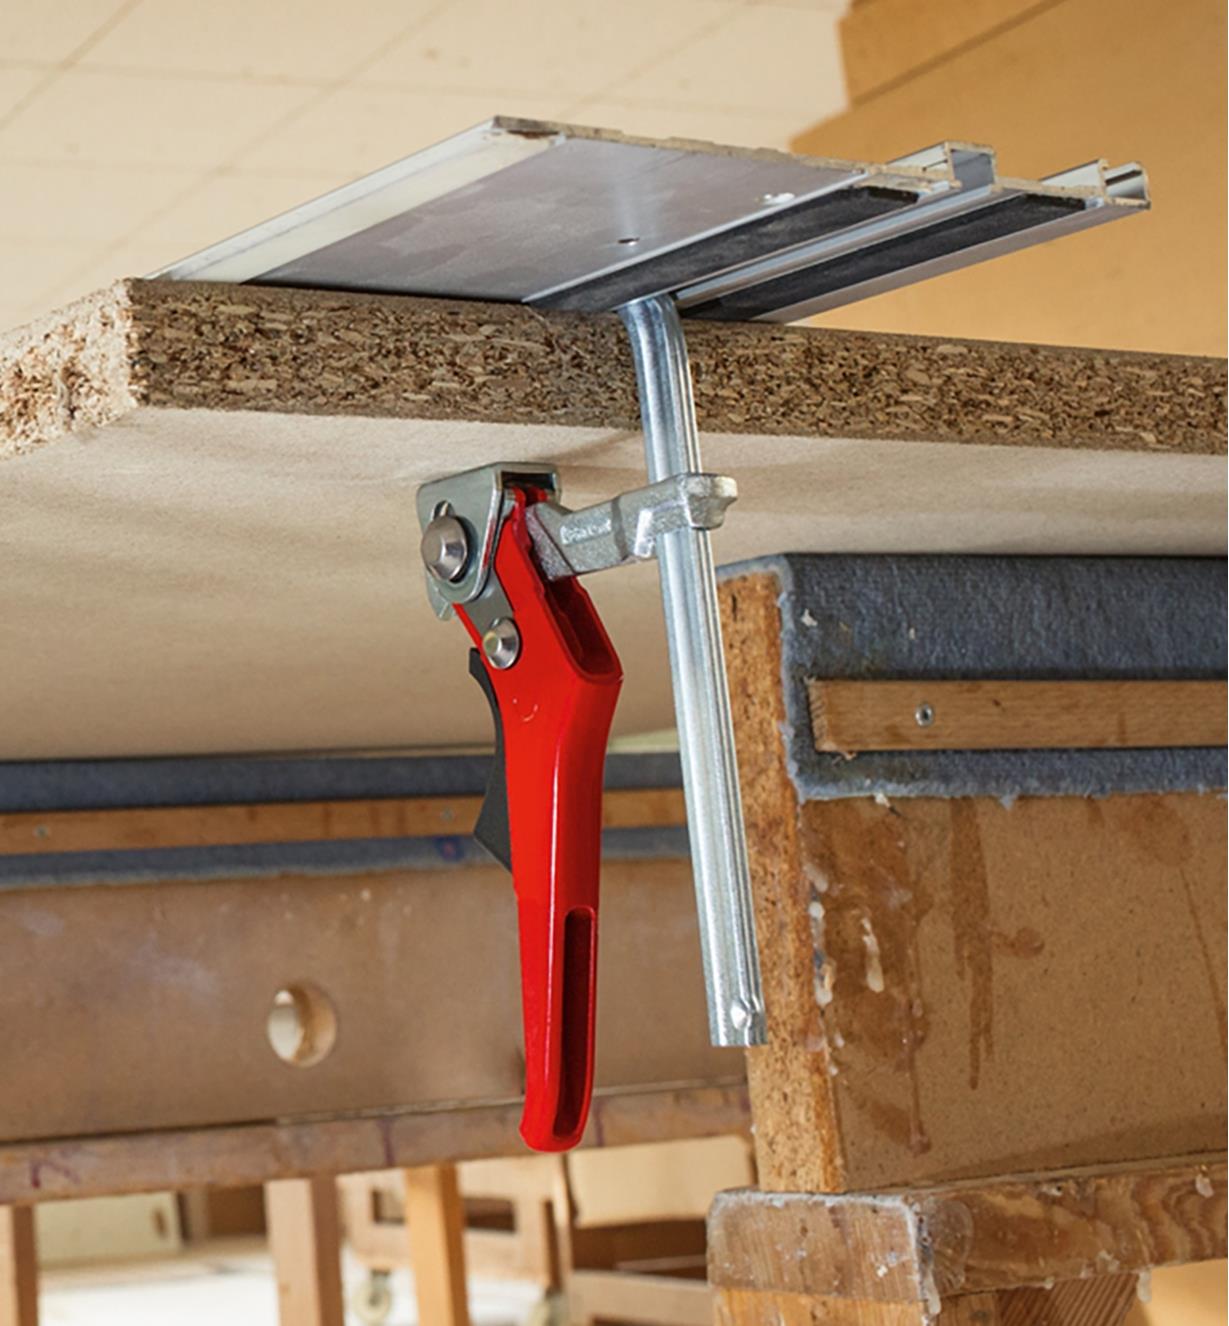 A Bessey ratcheting track clamp being used to hold a track-saw guide in position on a panel